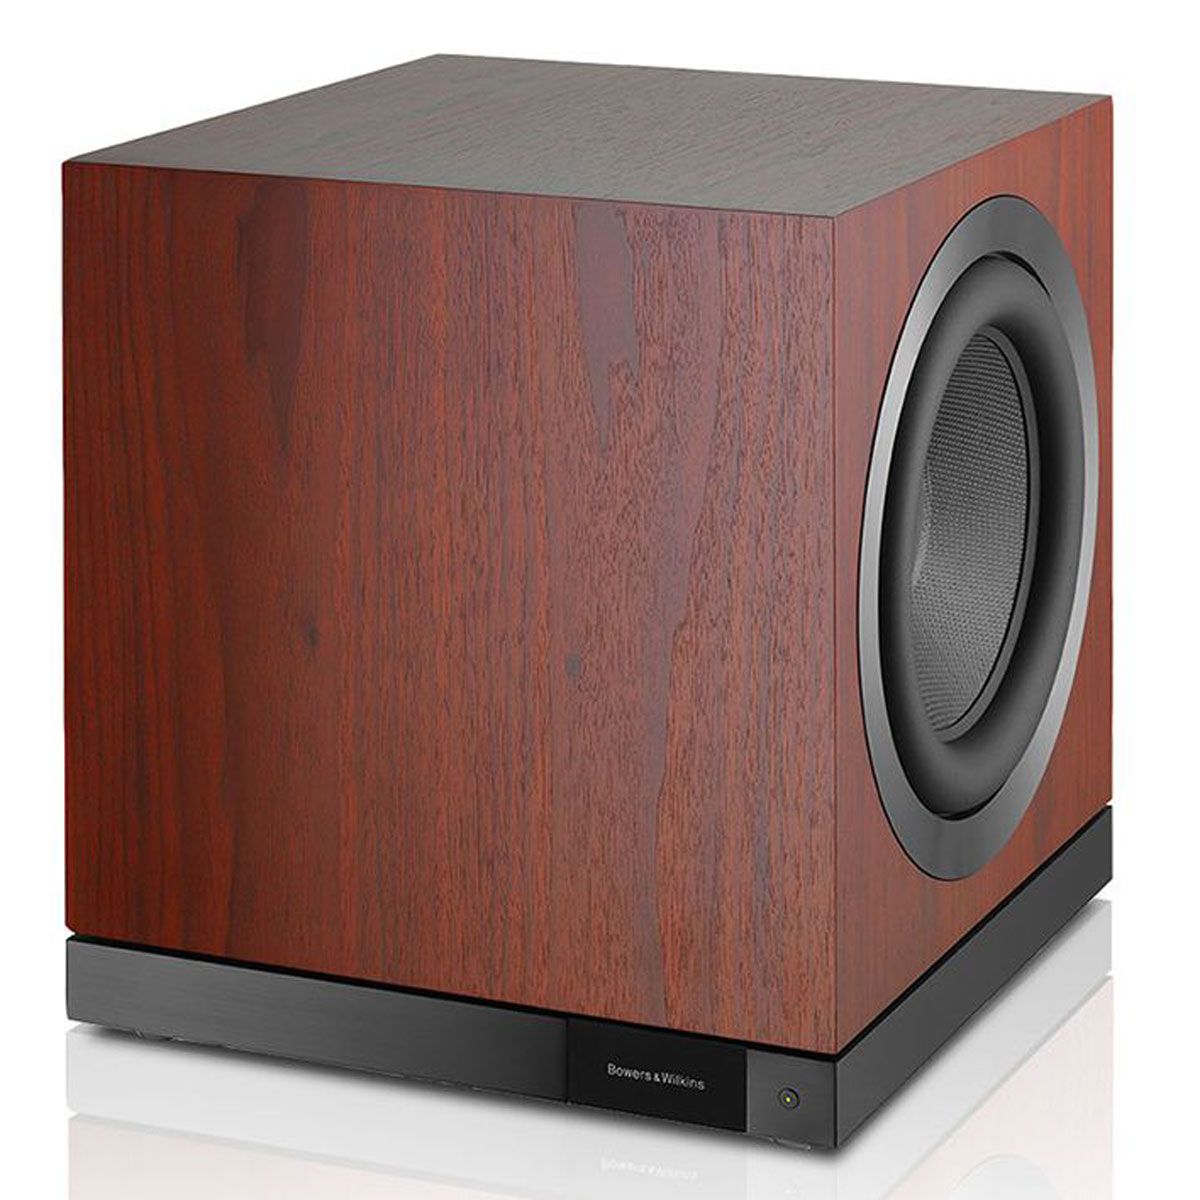 Bowers & Wilkins DB1D Subwoofer - Rosenut - Side angle no grille